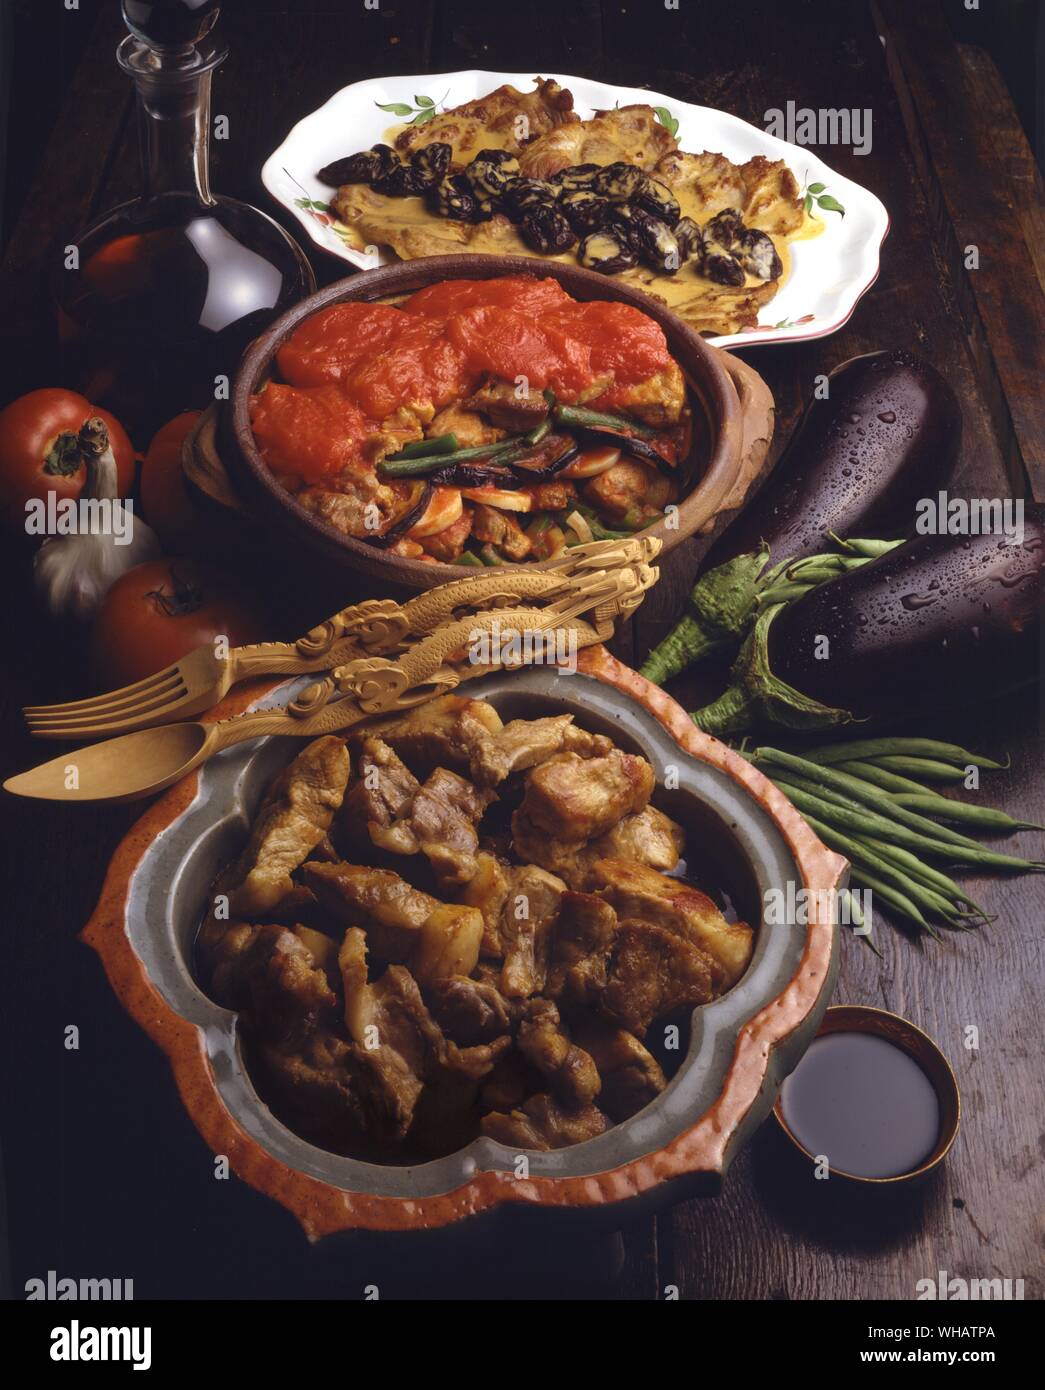 International Cooking . Top to Bottom, Pork Fillets With Prunes.. Noisettes De Porc Aux Pruneaux, France.. . Pork And Vegetable Stew.. Djuvec, Yugoslavia.. . Pork In A Sour Sauce.. Adobo, Philippines. Stock Photo